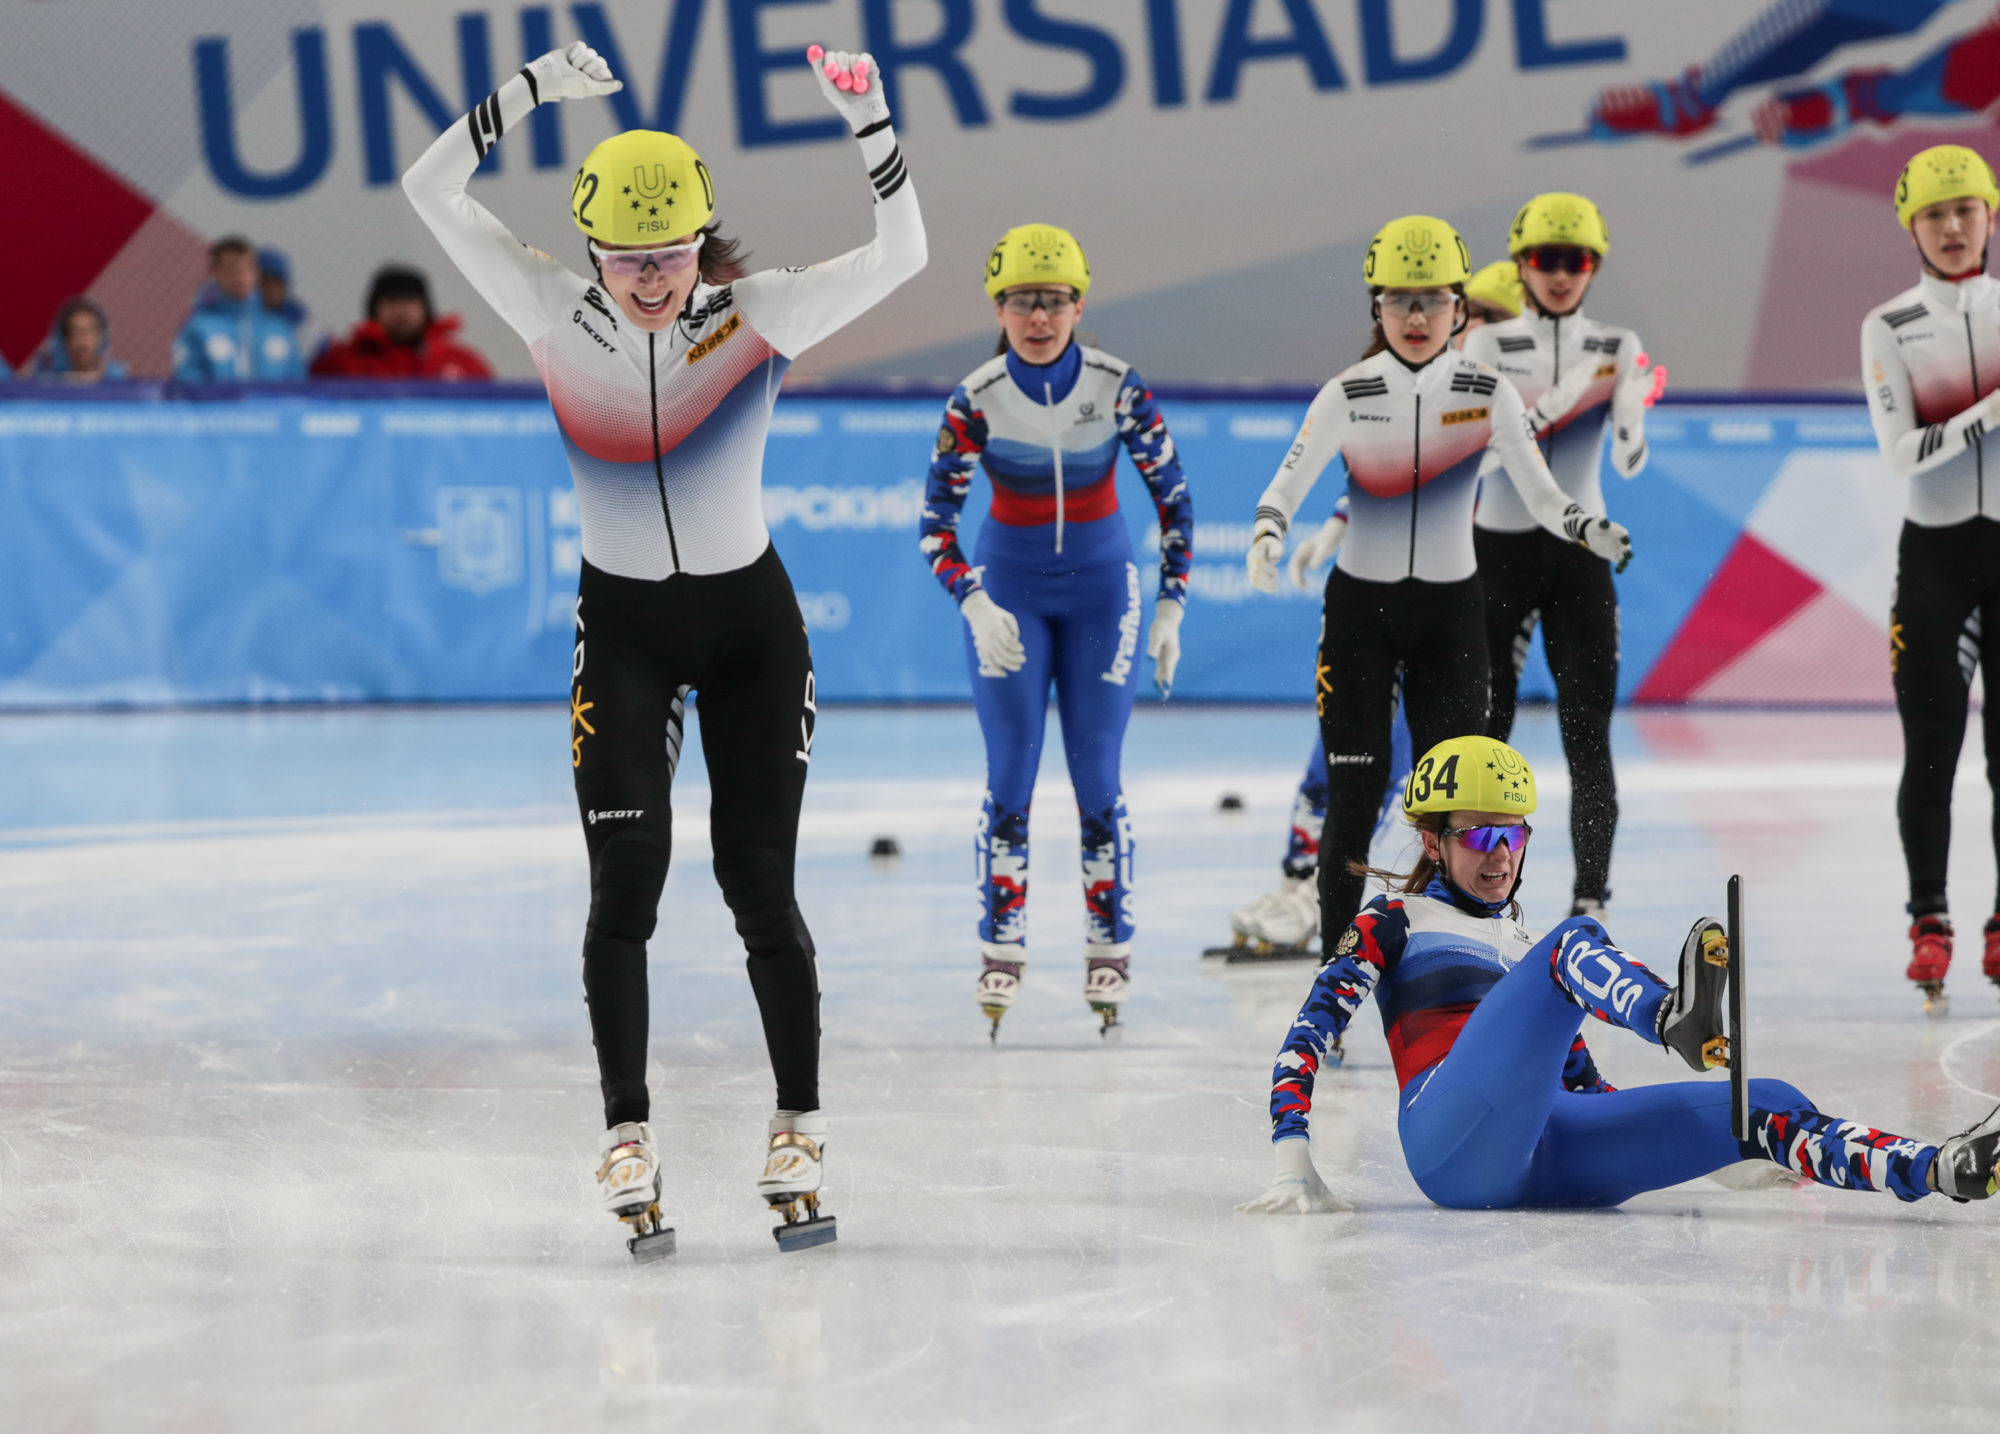 South Korea appeared to have won the women's 3,000m relay but were later disqualified ©Krasnoyarsk 2019